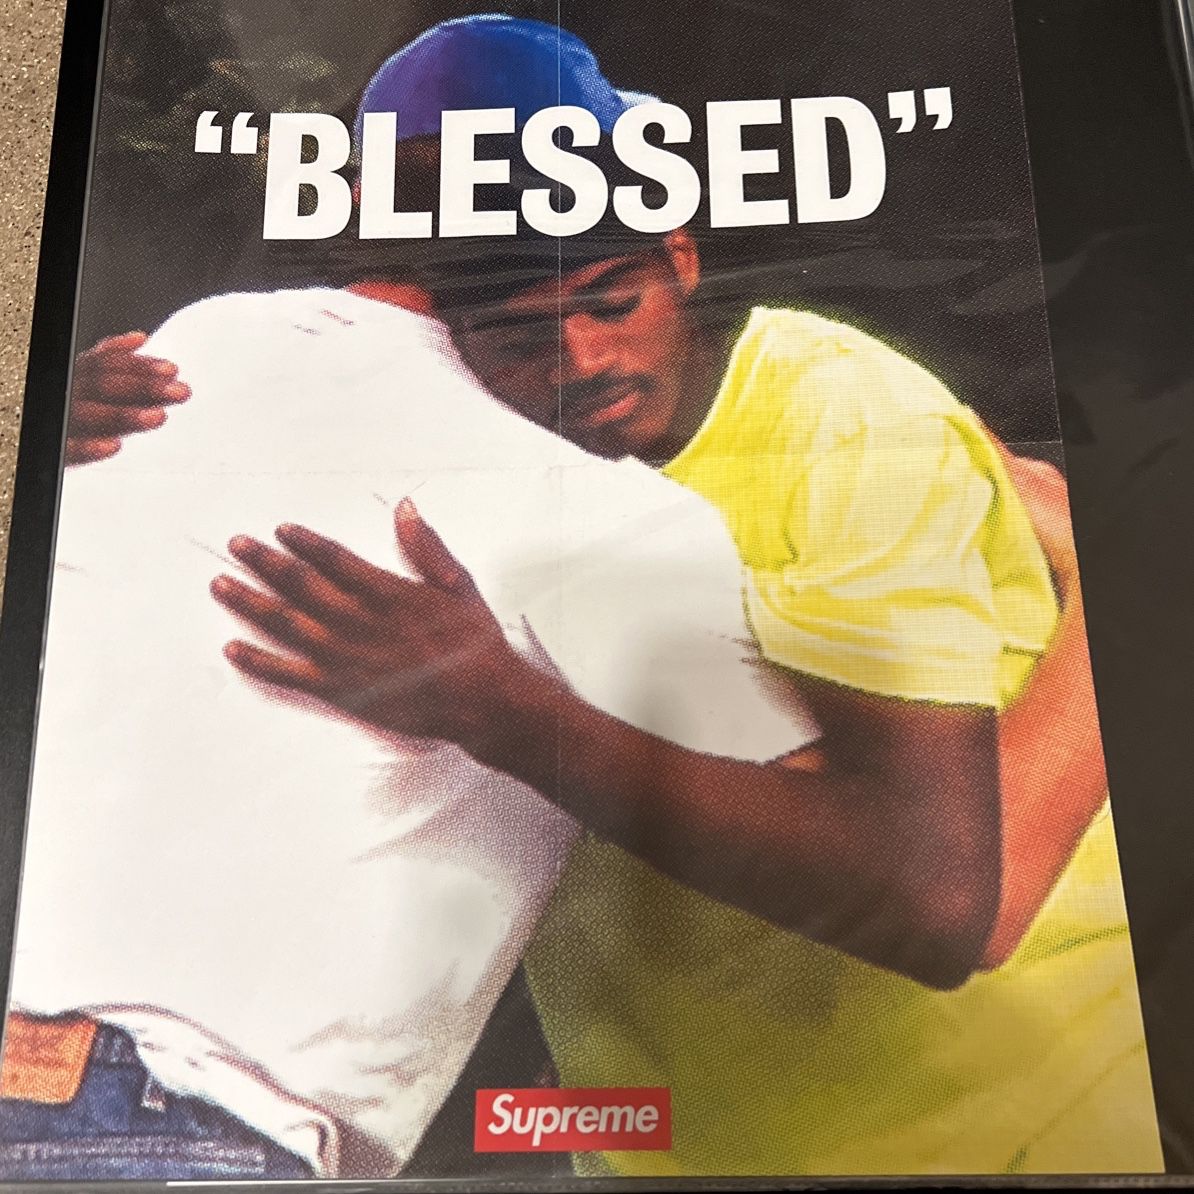 SUPREME BLESSED POSTER THRASHER MAGAZINE for Sale in West Covina, CA    OfferUp